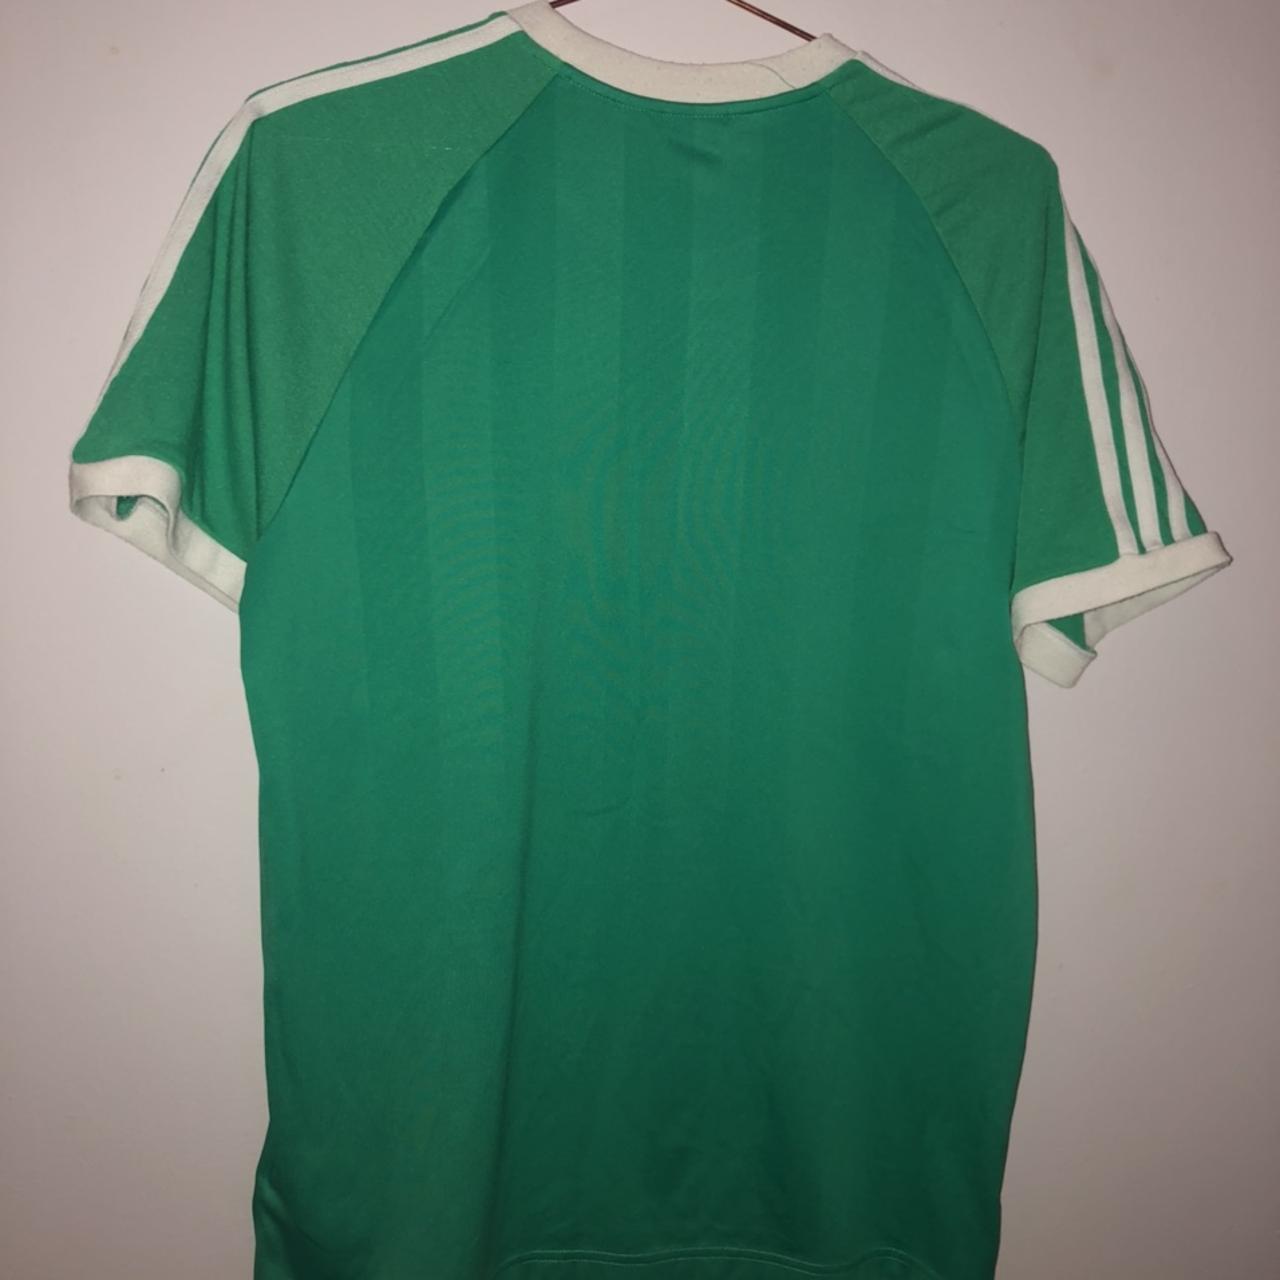 Green Adidas T-shirt with white stripes and logo//... - Depop